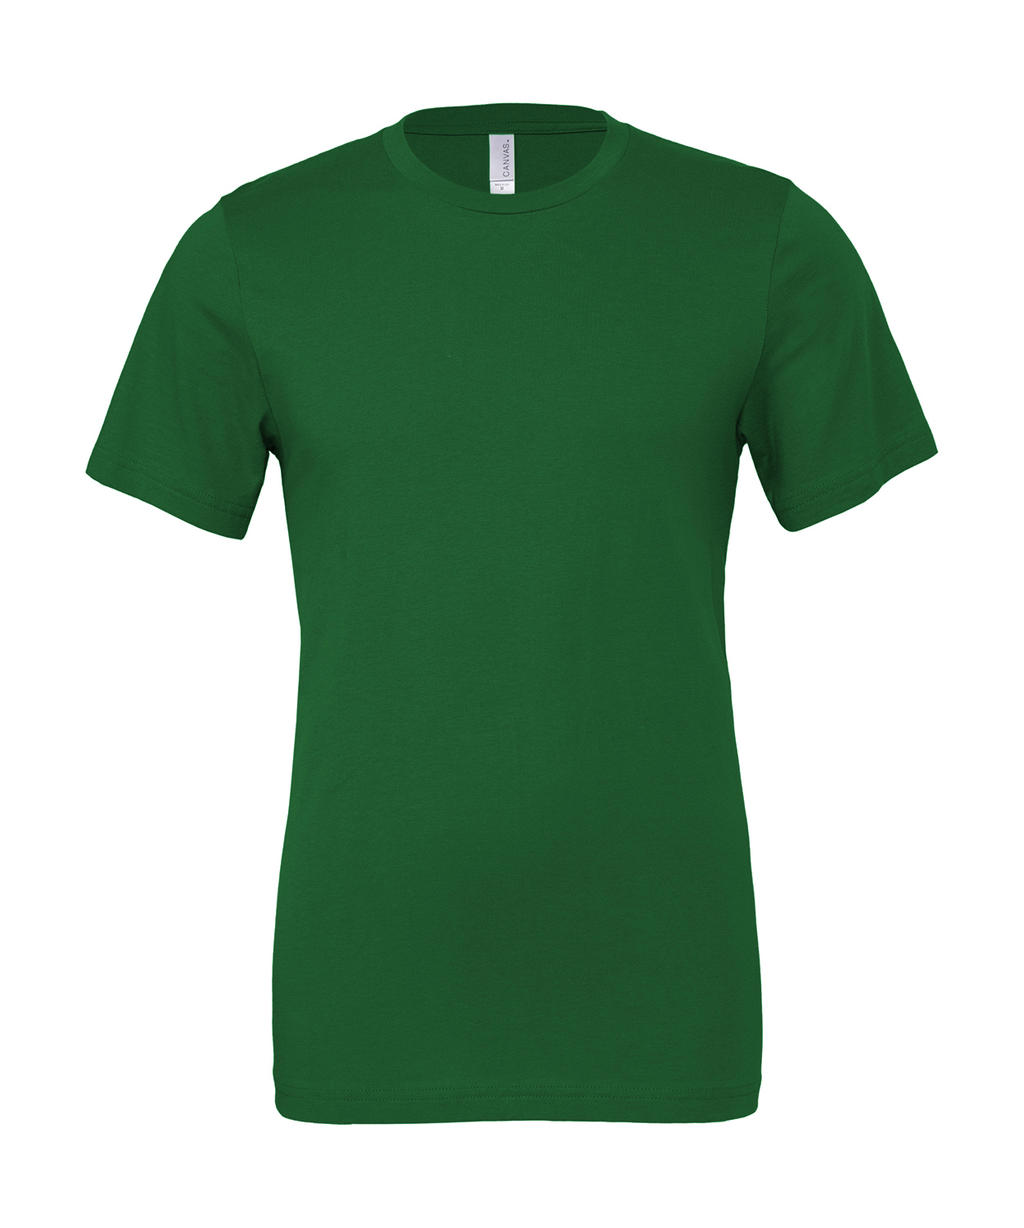  Unisex Jersey Short Sleeve Tee in Farbe Forest